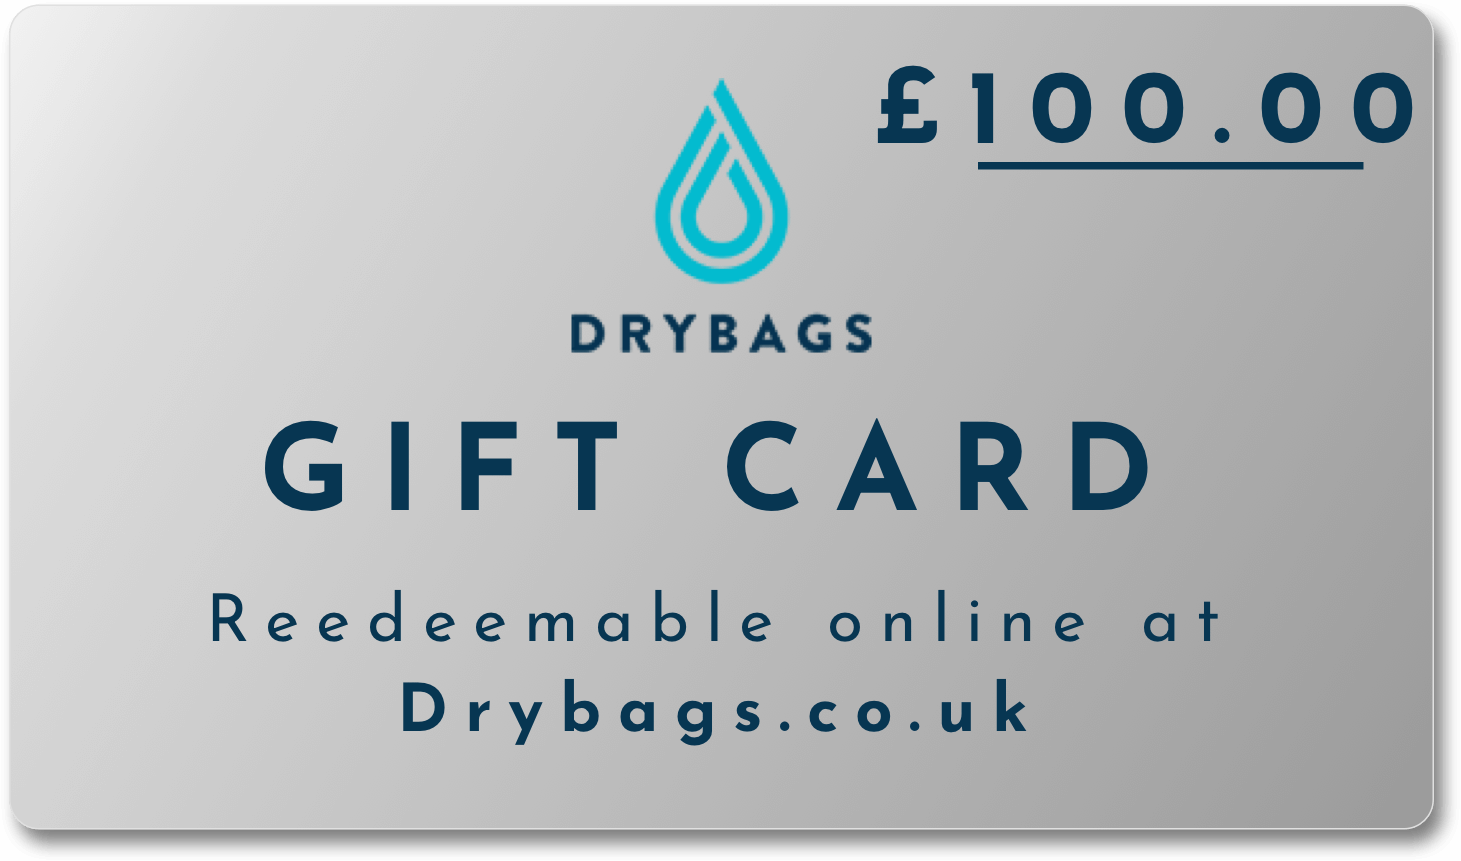 DryBags Gift Card